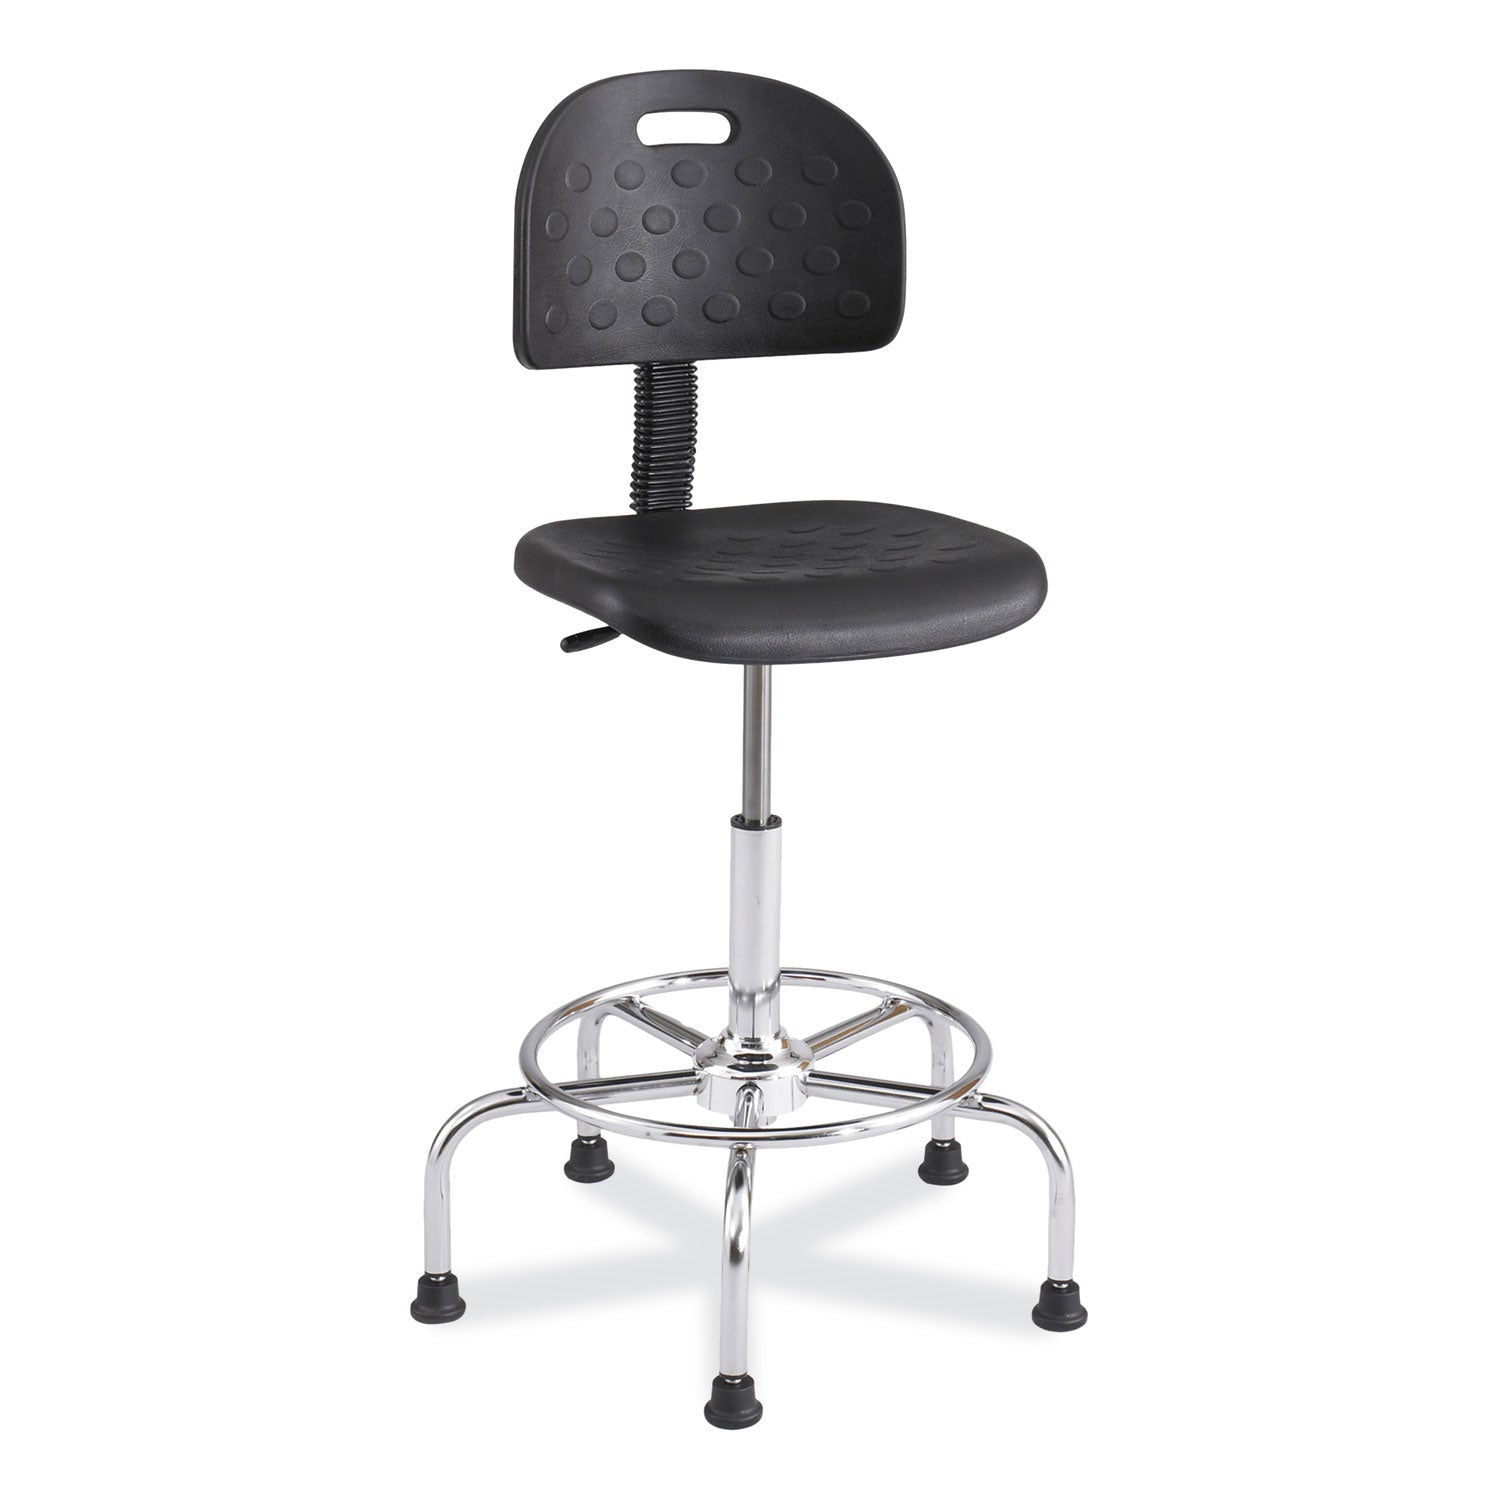 workfit-economy-industrial-chair-up-to-400-lb-22-to-30-high-black-seat-back-silver-base-ships-in-1-3-business-days_saf6950bl - 1